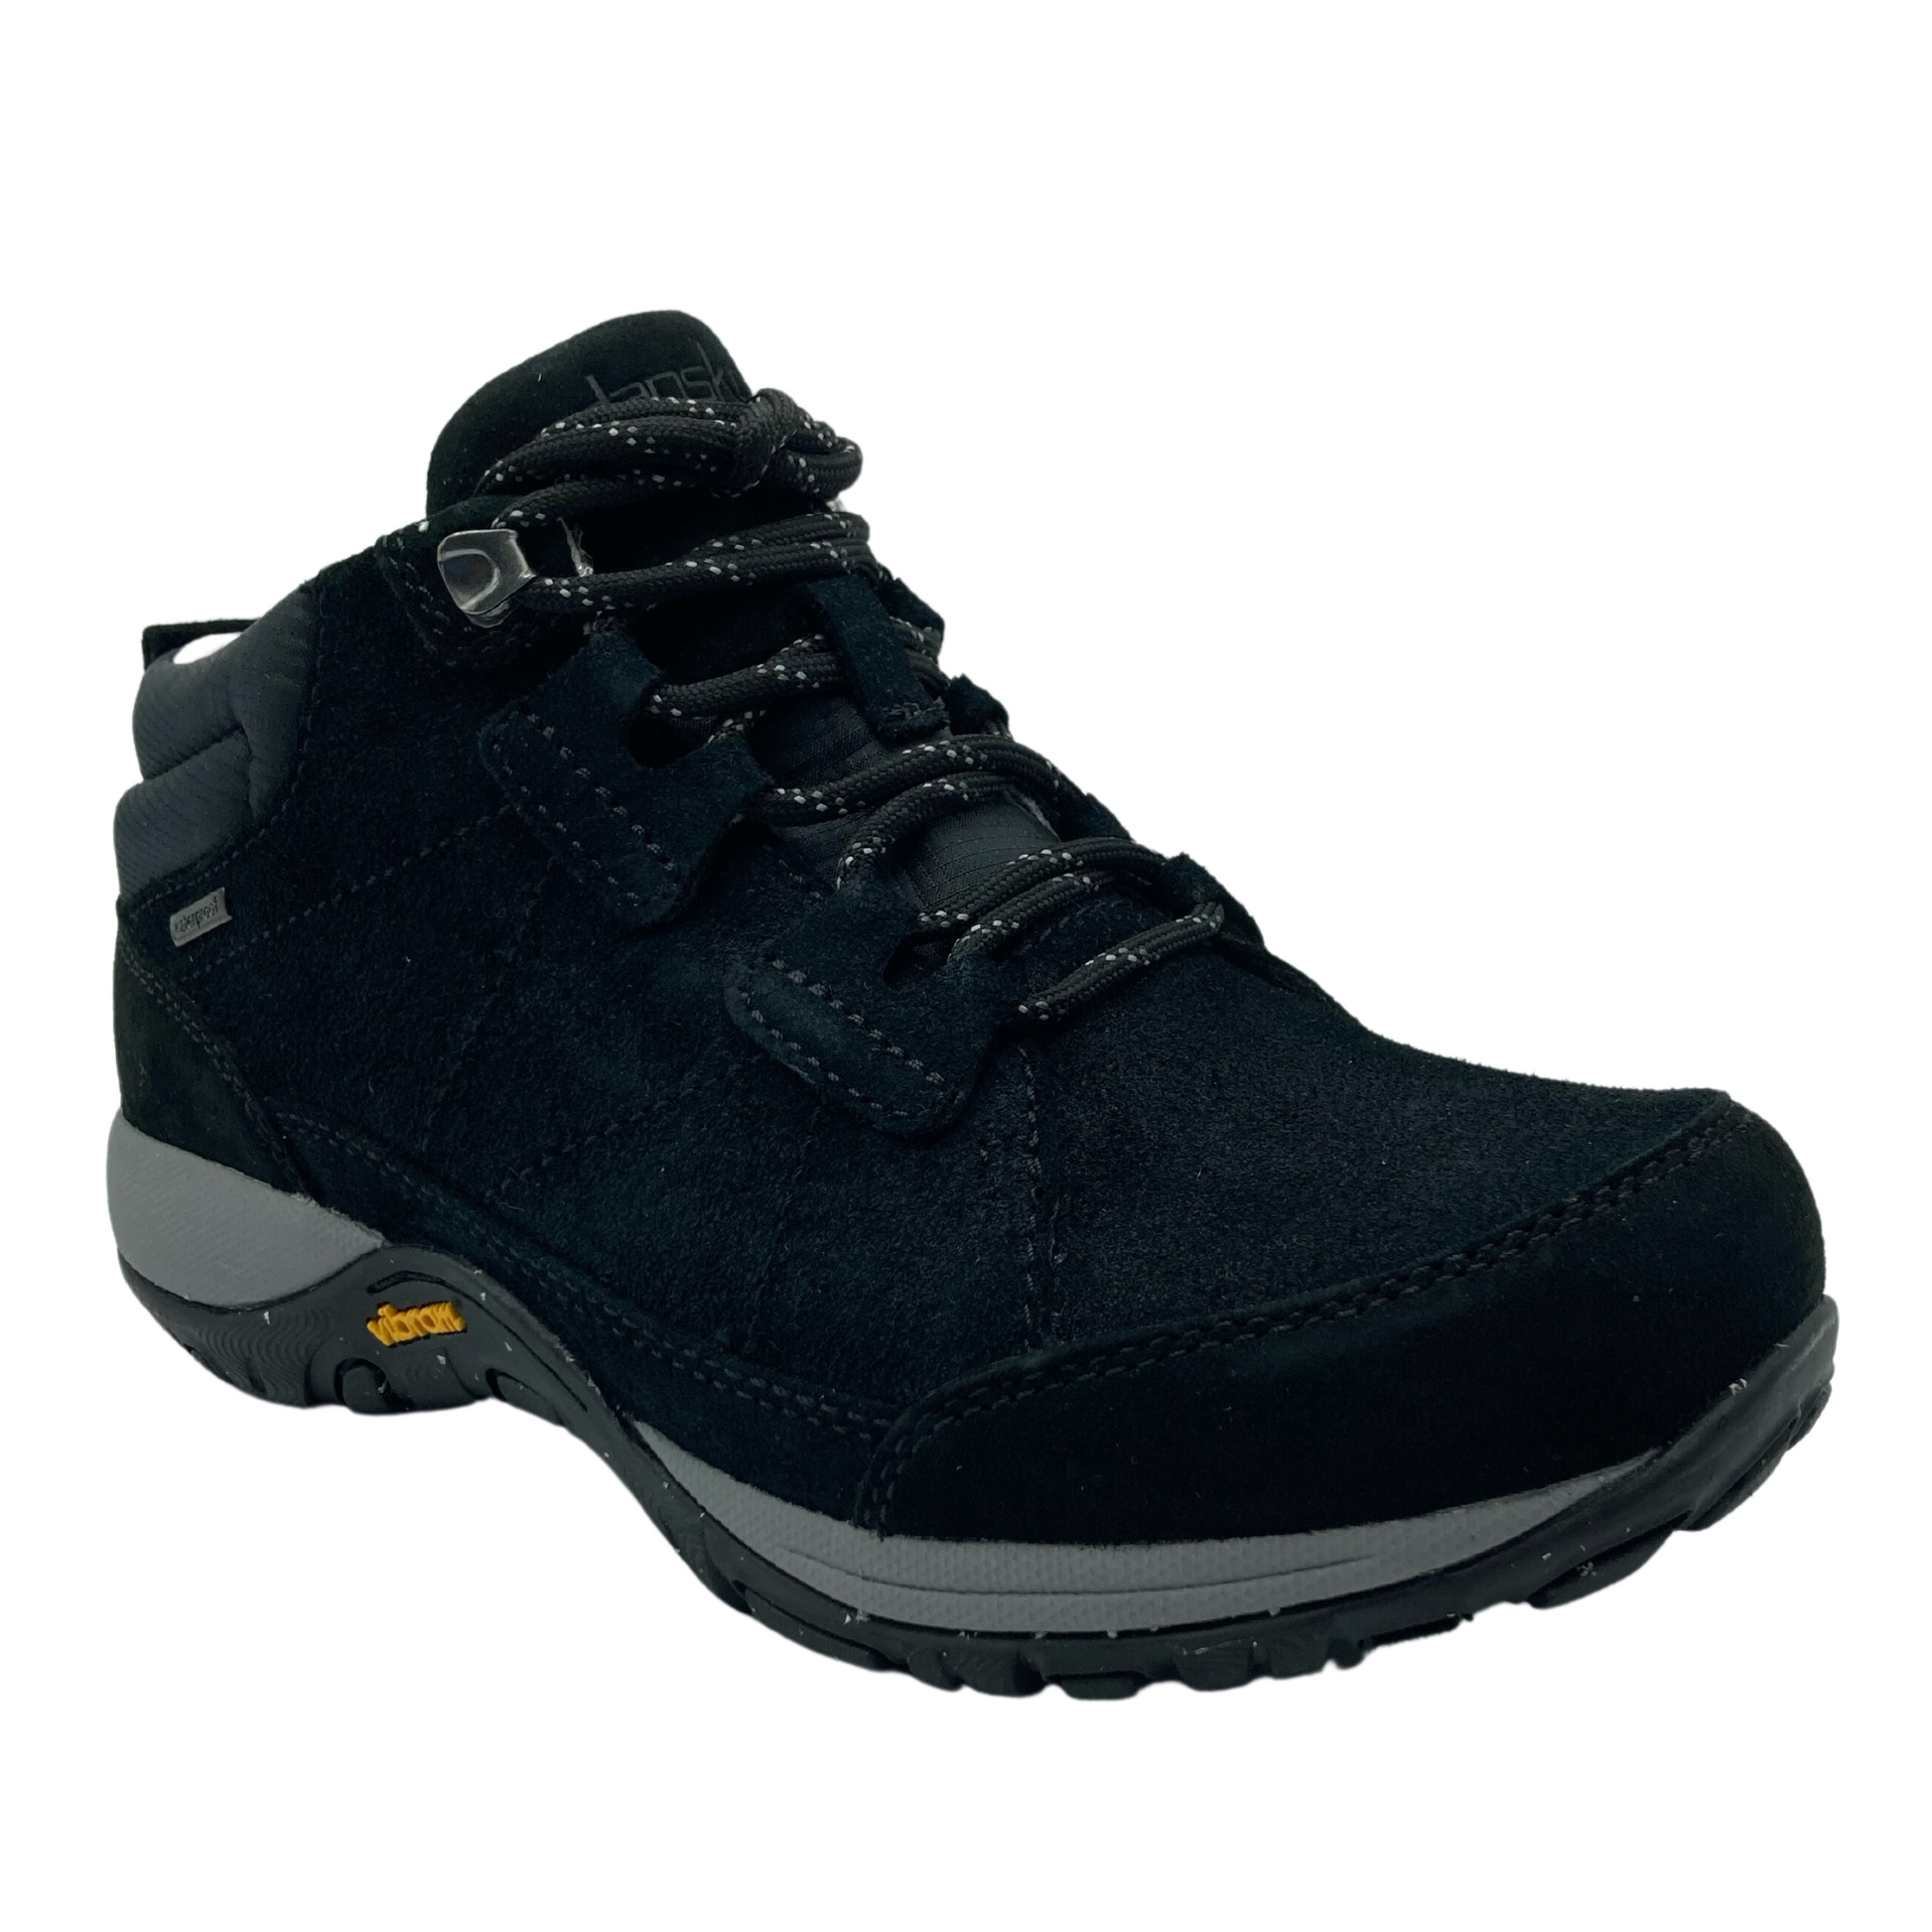 Angled view of black suede walking boot